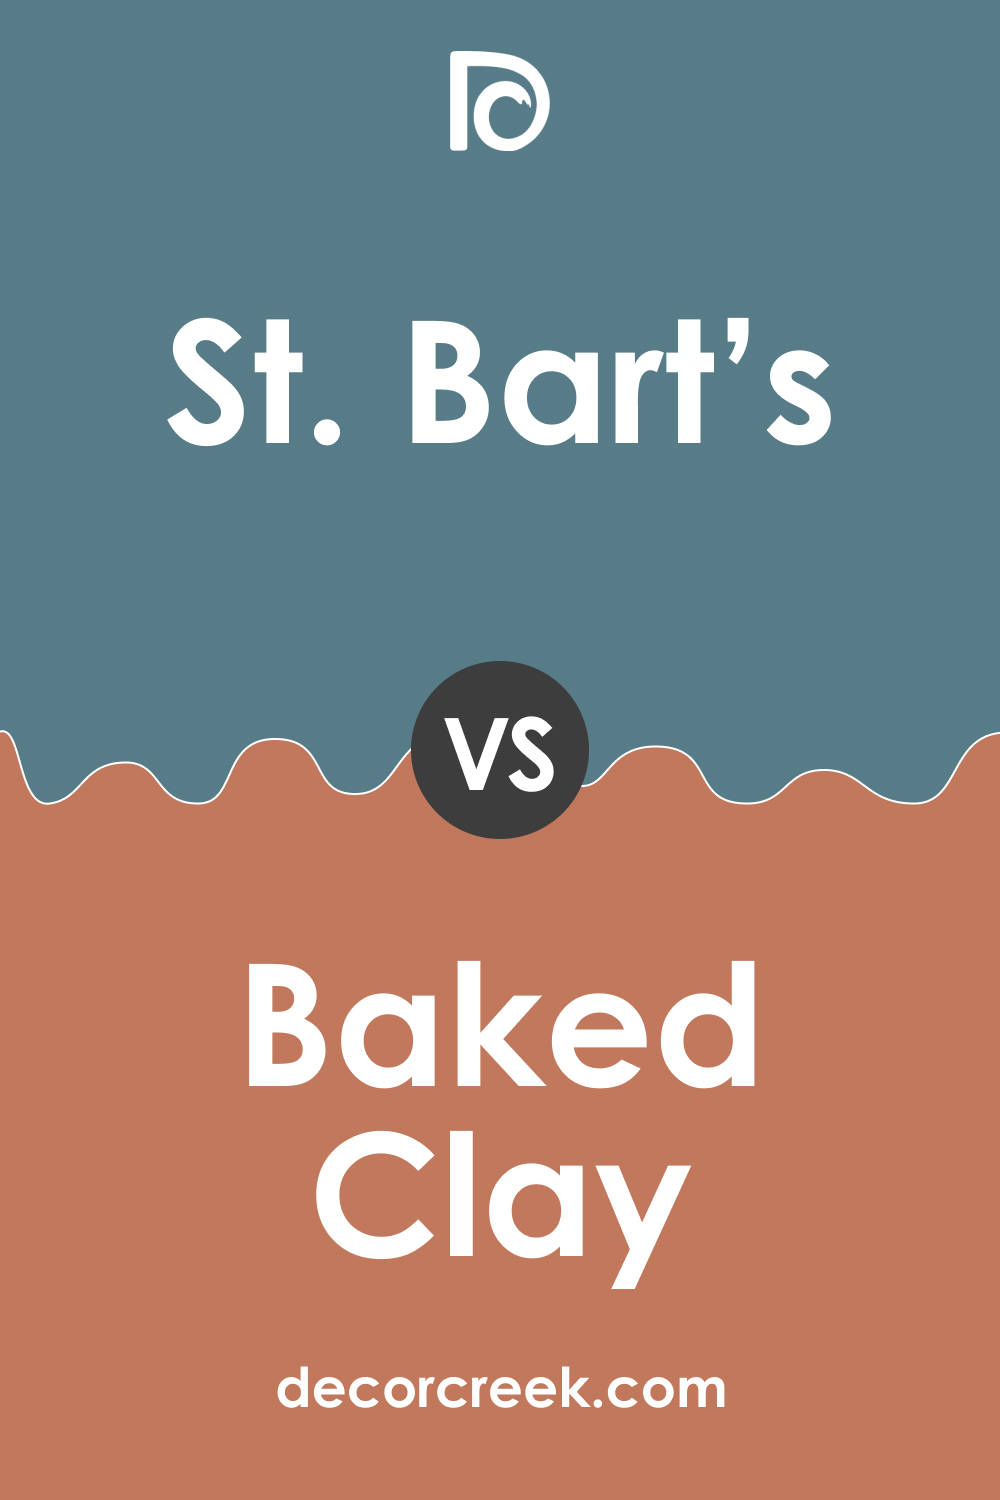 SW 7614 St. Bart’s vs. SW 6340 Baked Clay